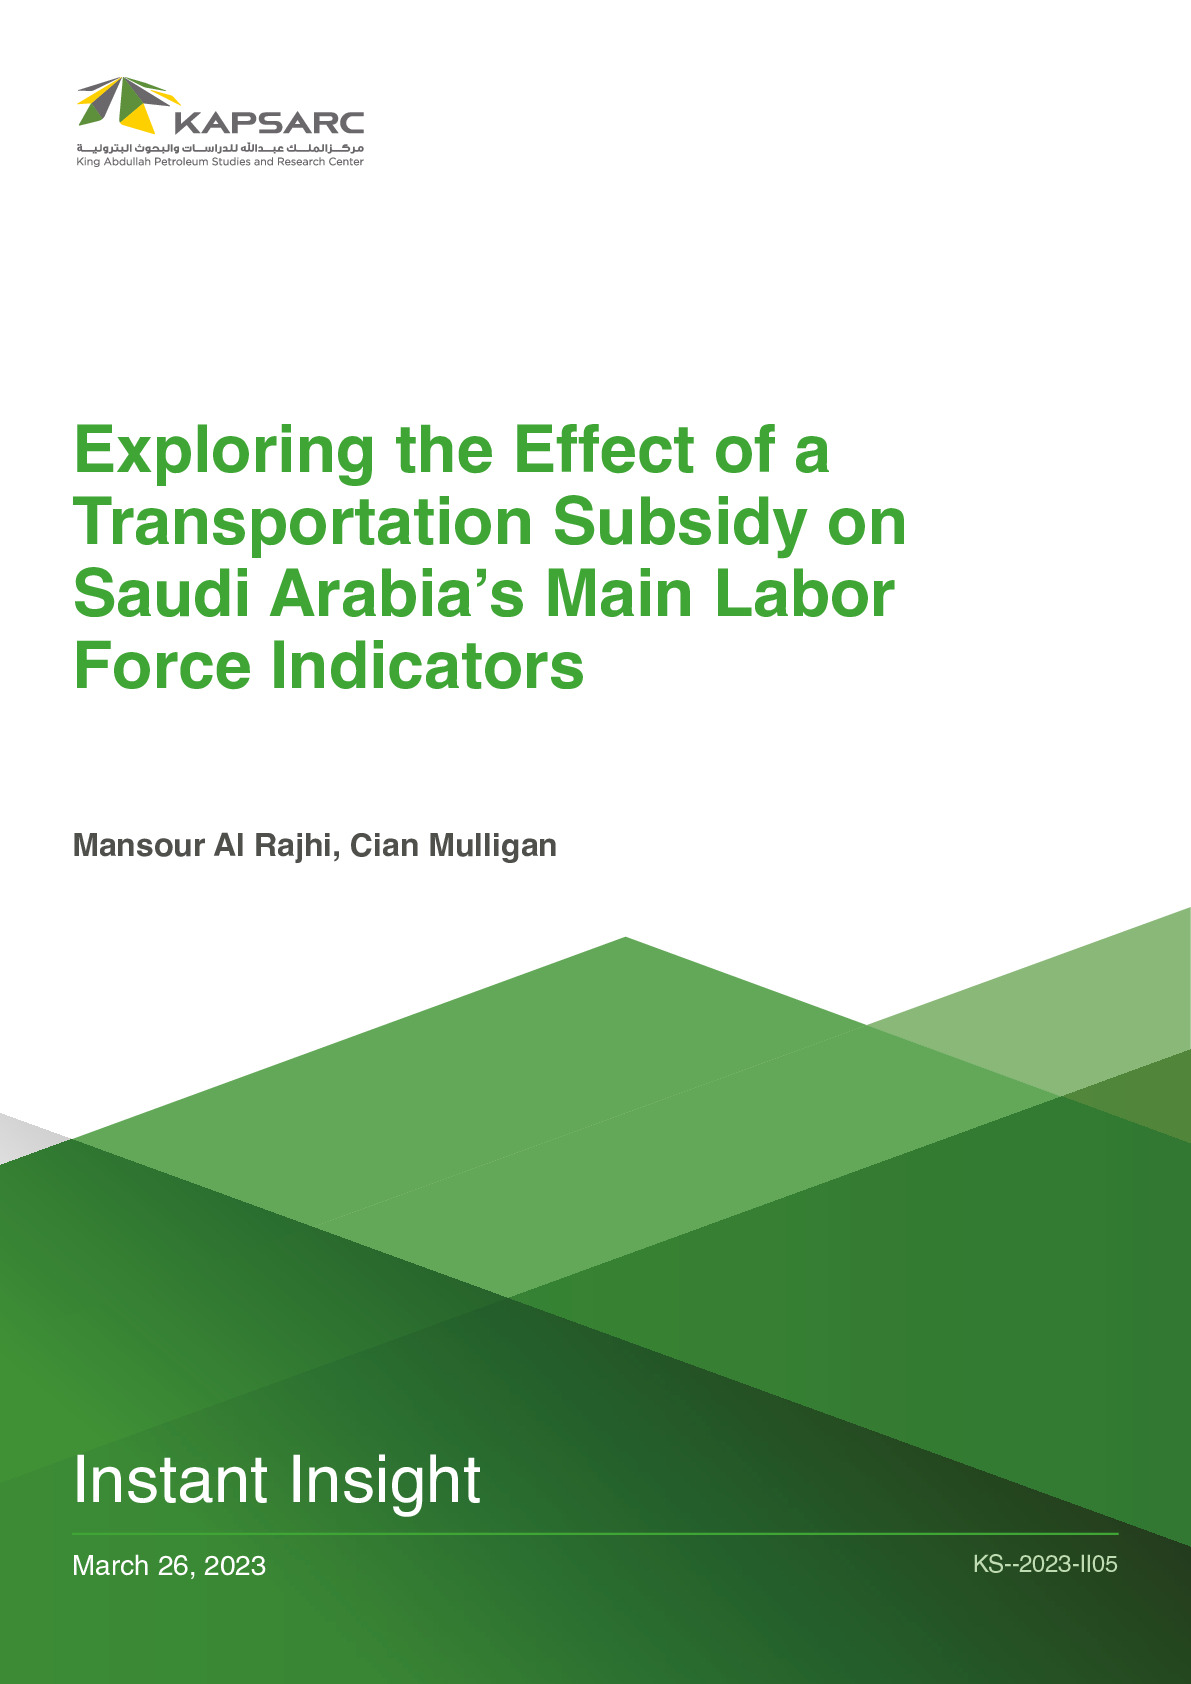 Exploring the Effect of a Transportation Subsidy on Saudi Arabia’s Main Labor Force Indicators